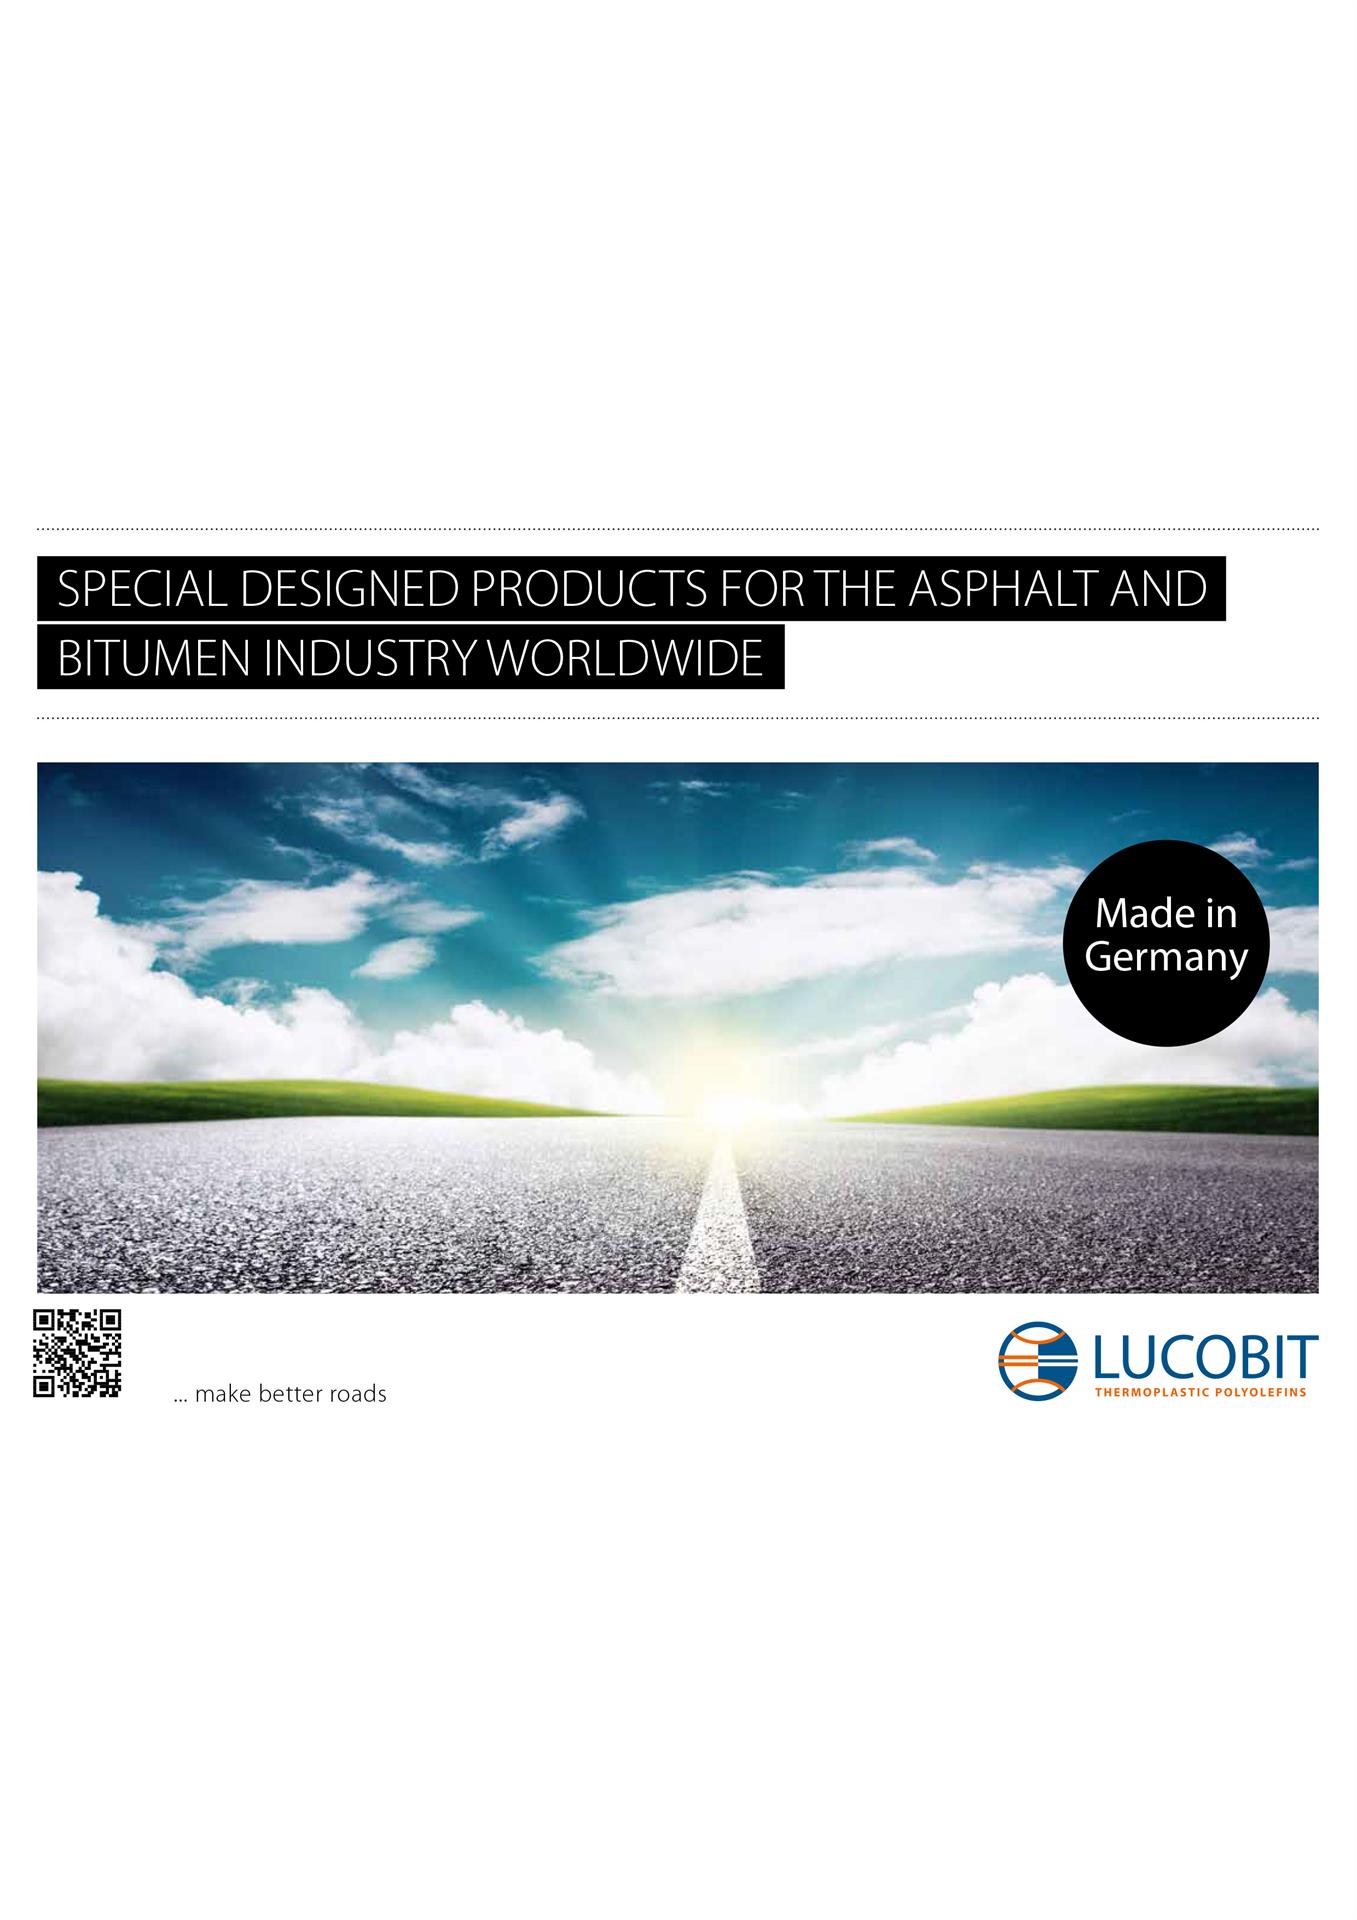 LUCOBIT Brochure - SPECIAL DESIGNED PRODUCTS FOR THE ASPHALT AND BITUMEN INDUSTRY WORLDWIDE